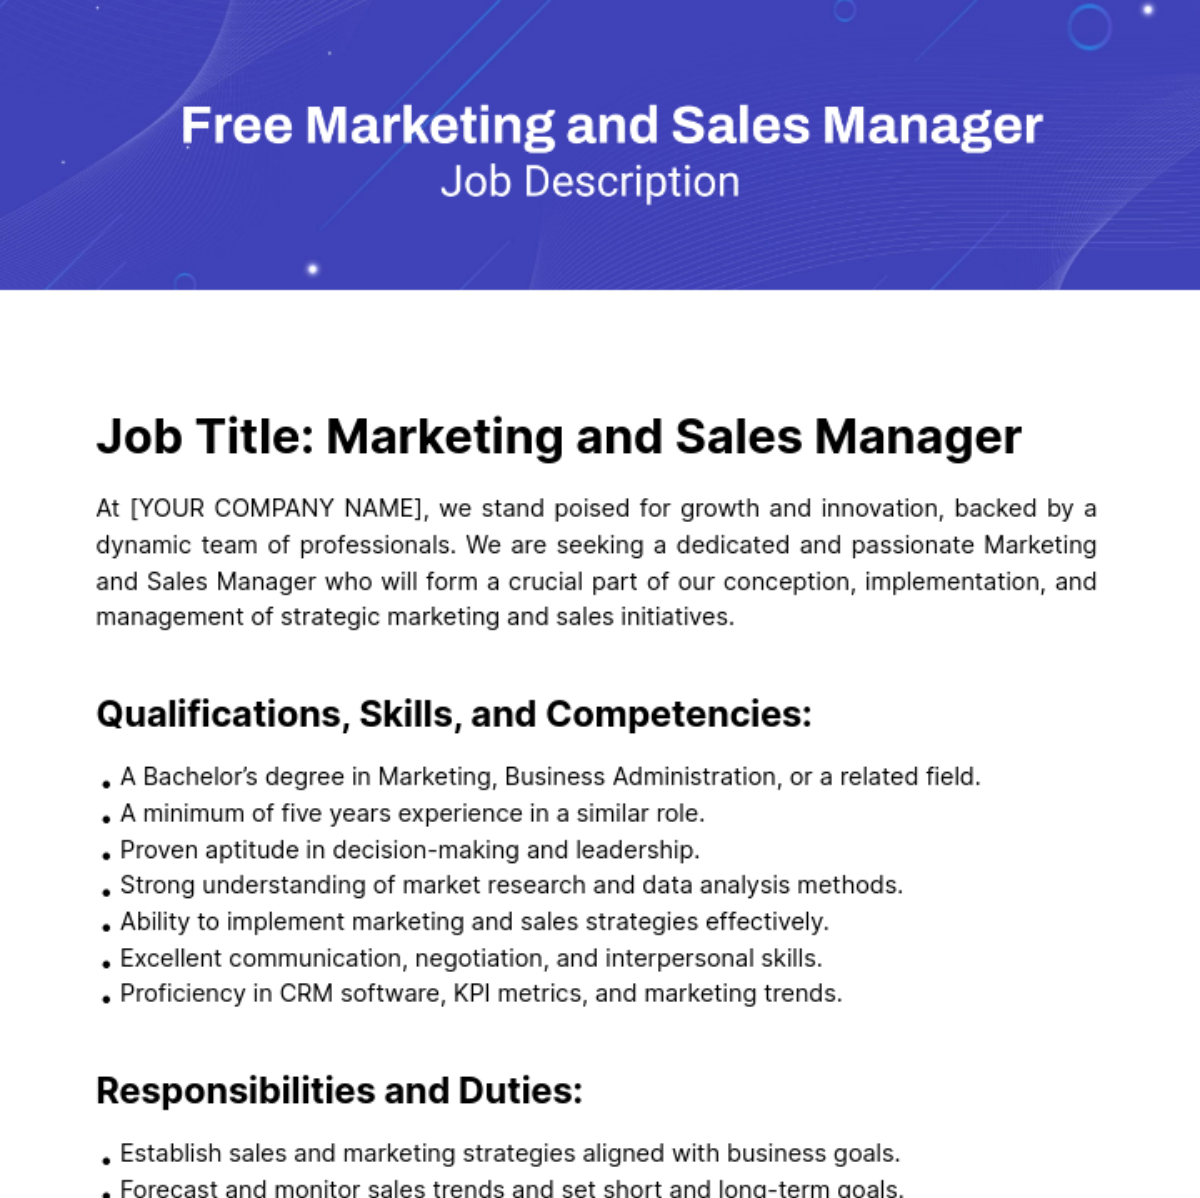 Free Marketing and Sales Manager Job Description Template